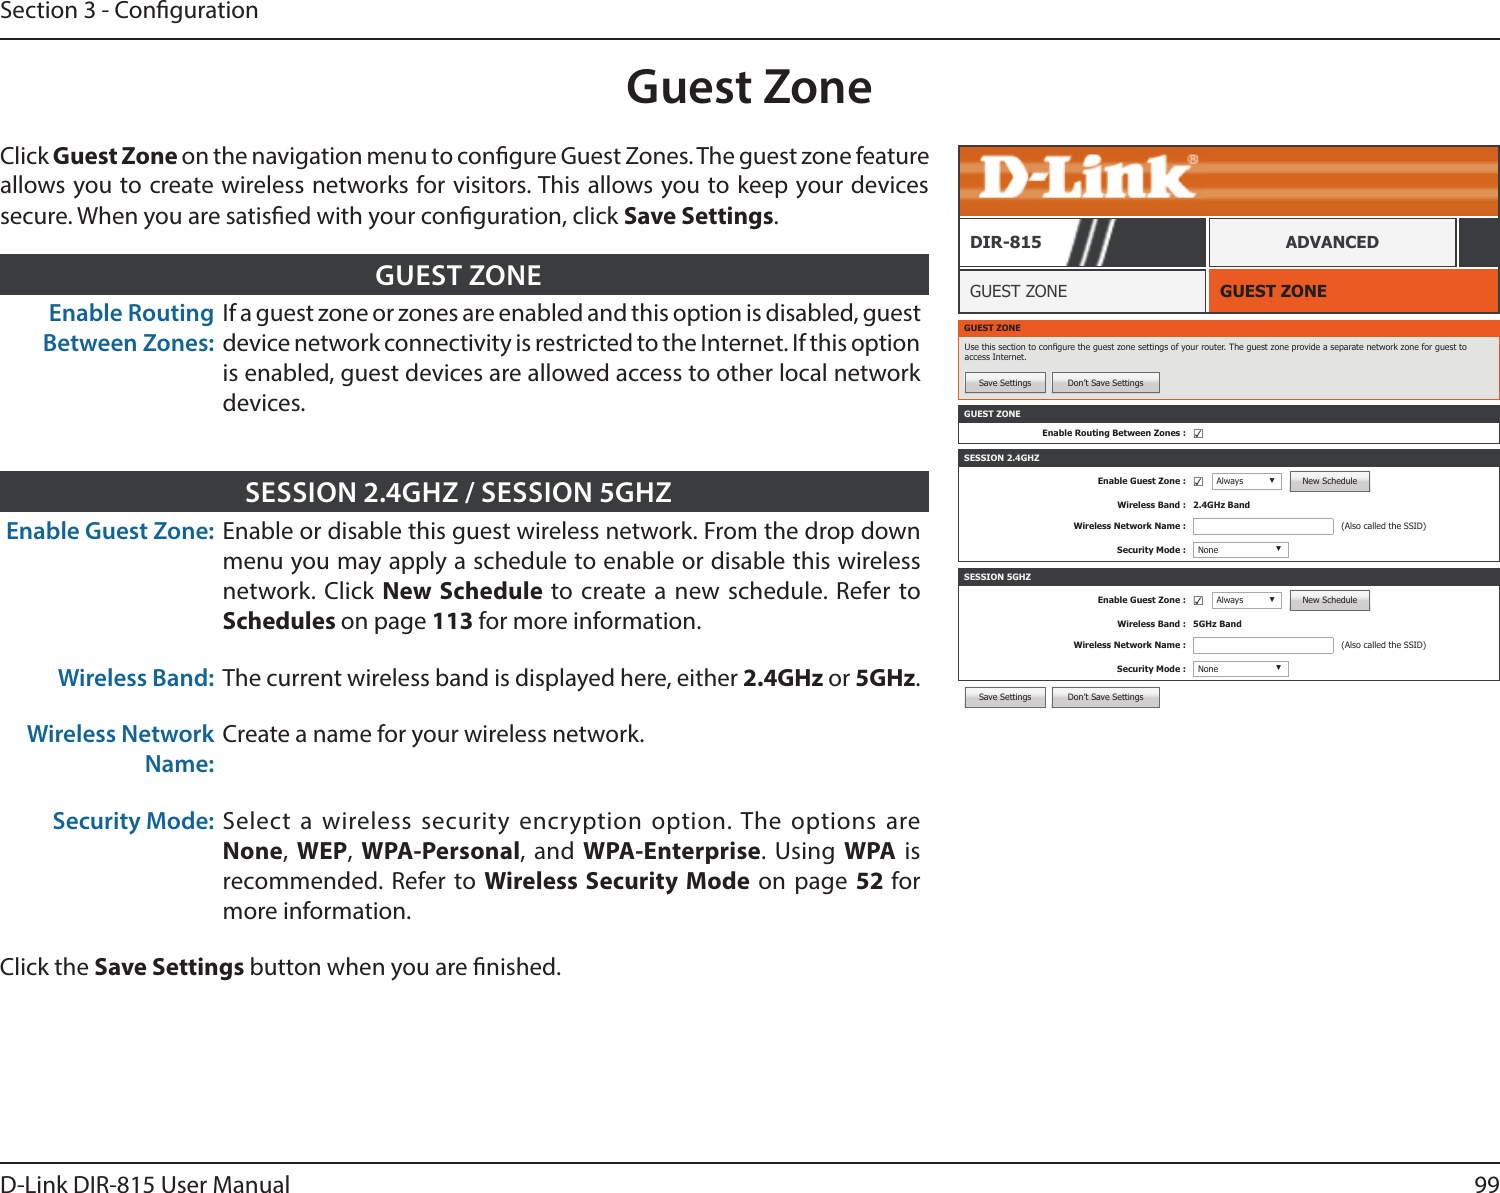 99D-Link DIR-815 User ManualSection 3 - CongurationSave Settings Don’t Save SettingsGuest ZoneGUEST ZONEGUEST ZONEDIR-815 ADVANCEDClick Guest Zone on the navigation menu to congure Guest Zones. The guest zone feature allows you to create wireless networks for visitors. This allows you to keep your devices secure. When you are satised with your conguration, click Save Settings.Enable Routing Between Zones:If a guest zone or zones are enabled and this option is disabled, guest device network connectivity is restricted to the Internet. If this option is enabled, guest devices are allowed access to other local network devices.GUEST ZONEEnable Guest Zone: Enable or disable this guest wireless network. From the drop down menu you may apply a schedule to enable or disable this wireless network. Click New Schedule to create a new schedule. Refer to Schedules on page 113 for more information.Wireless Band: The current wireless band is displayed here, either 2.4GHz or 5GHz.Wireless Network Name:Create a name for your wireless network.Security Mode: Select a wireless security encryption option. The options are None, WEP,  WPA-Personal, and WPA-Enterprise. Using WPA is recommended. Refer to Wireless Security Mode on page 52 for more information.Click the Save Settings button when you are nished.SESSION 2.4GHZ / SESSION 5GHZGUEST ZONEUse this section to congure the guest zone settings of your router. The guest zone provide a separate network zone for guest to access Internet.Save Settings Don’t Save SettingsSESSION 2.4GHZEnable Guest Zone : ☑Always ▼New ScheduleWireless Band : 2.4GHz BandWireless Network Name : (Also called the SSID)Security Mode : None ▼SESSION 5GHZEnable Guest Zone : ☑Always ▼New ScheduleWireless Band : 5GHz BandWireless Network Name : (Also called the SSID)Security Mode : None ▼GUEST ZONEEnable Routing Between Zones : ☑